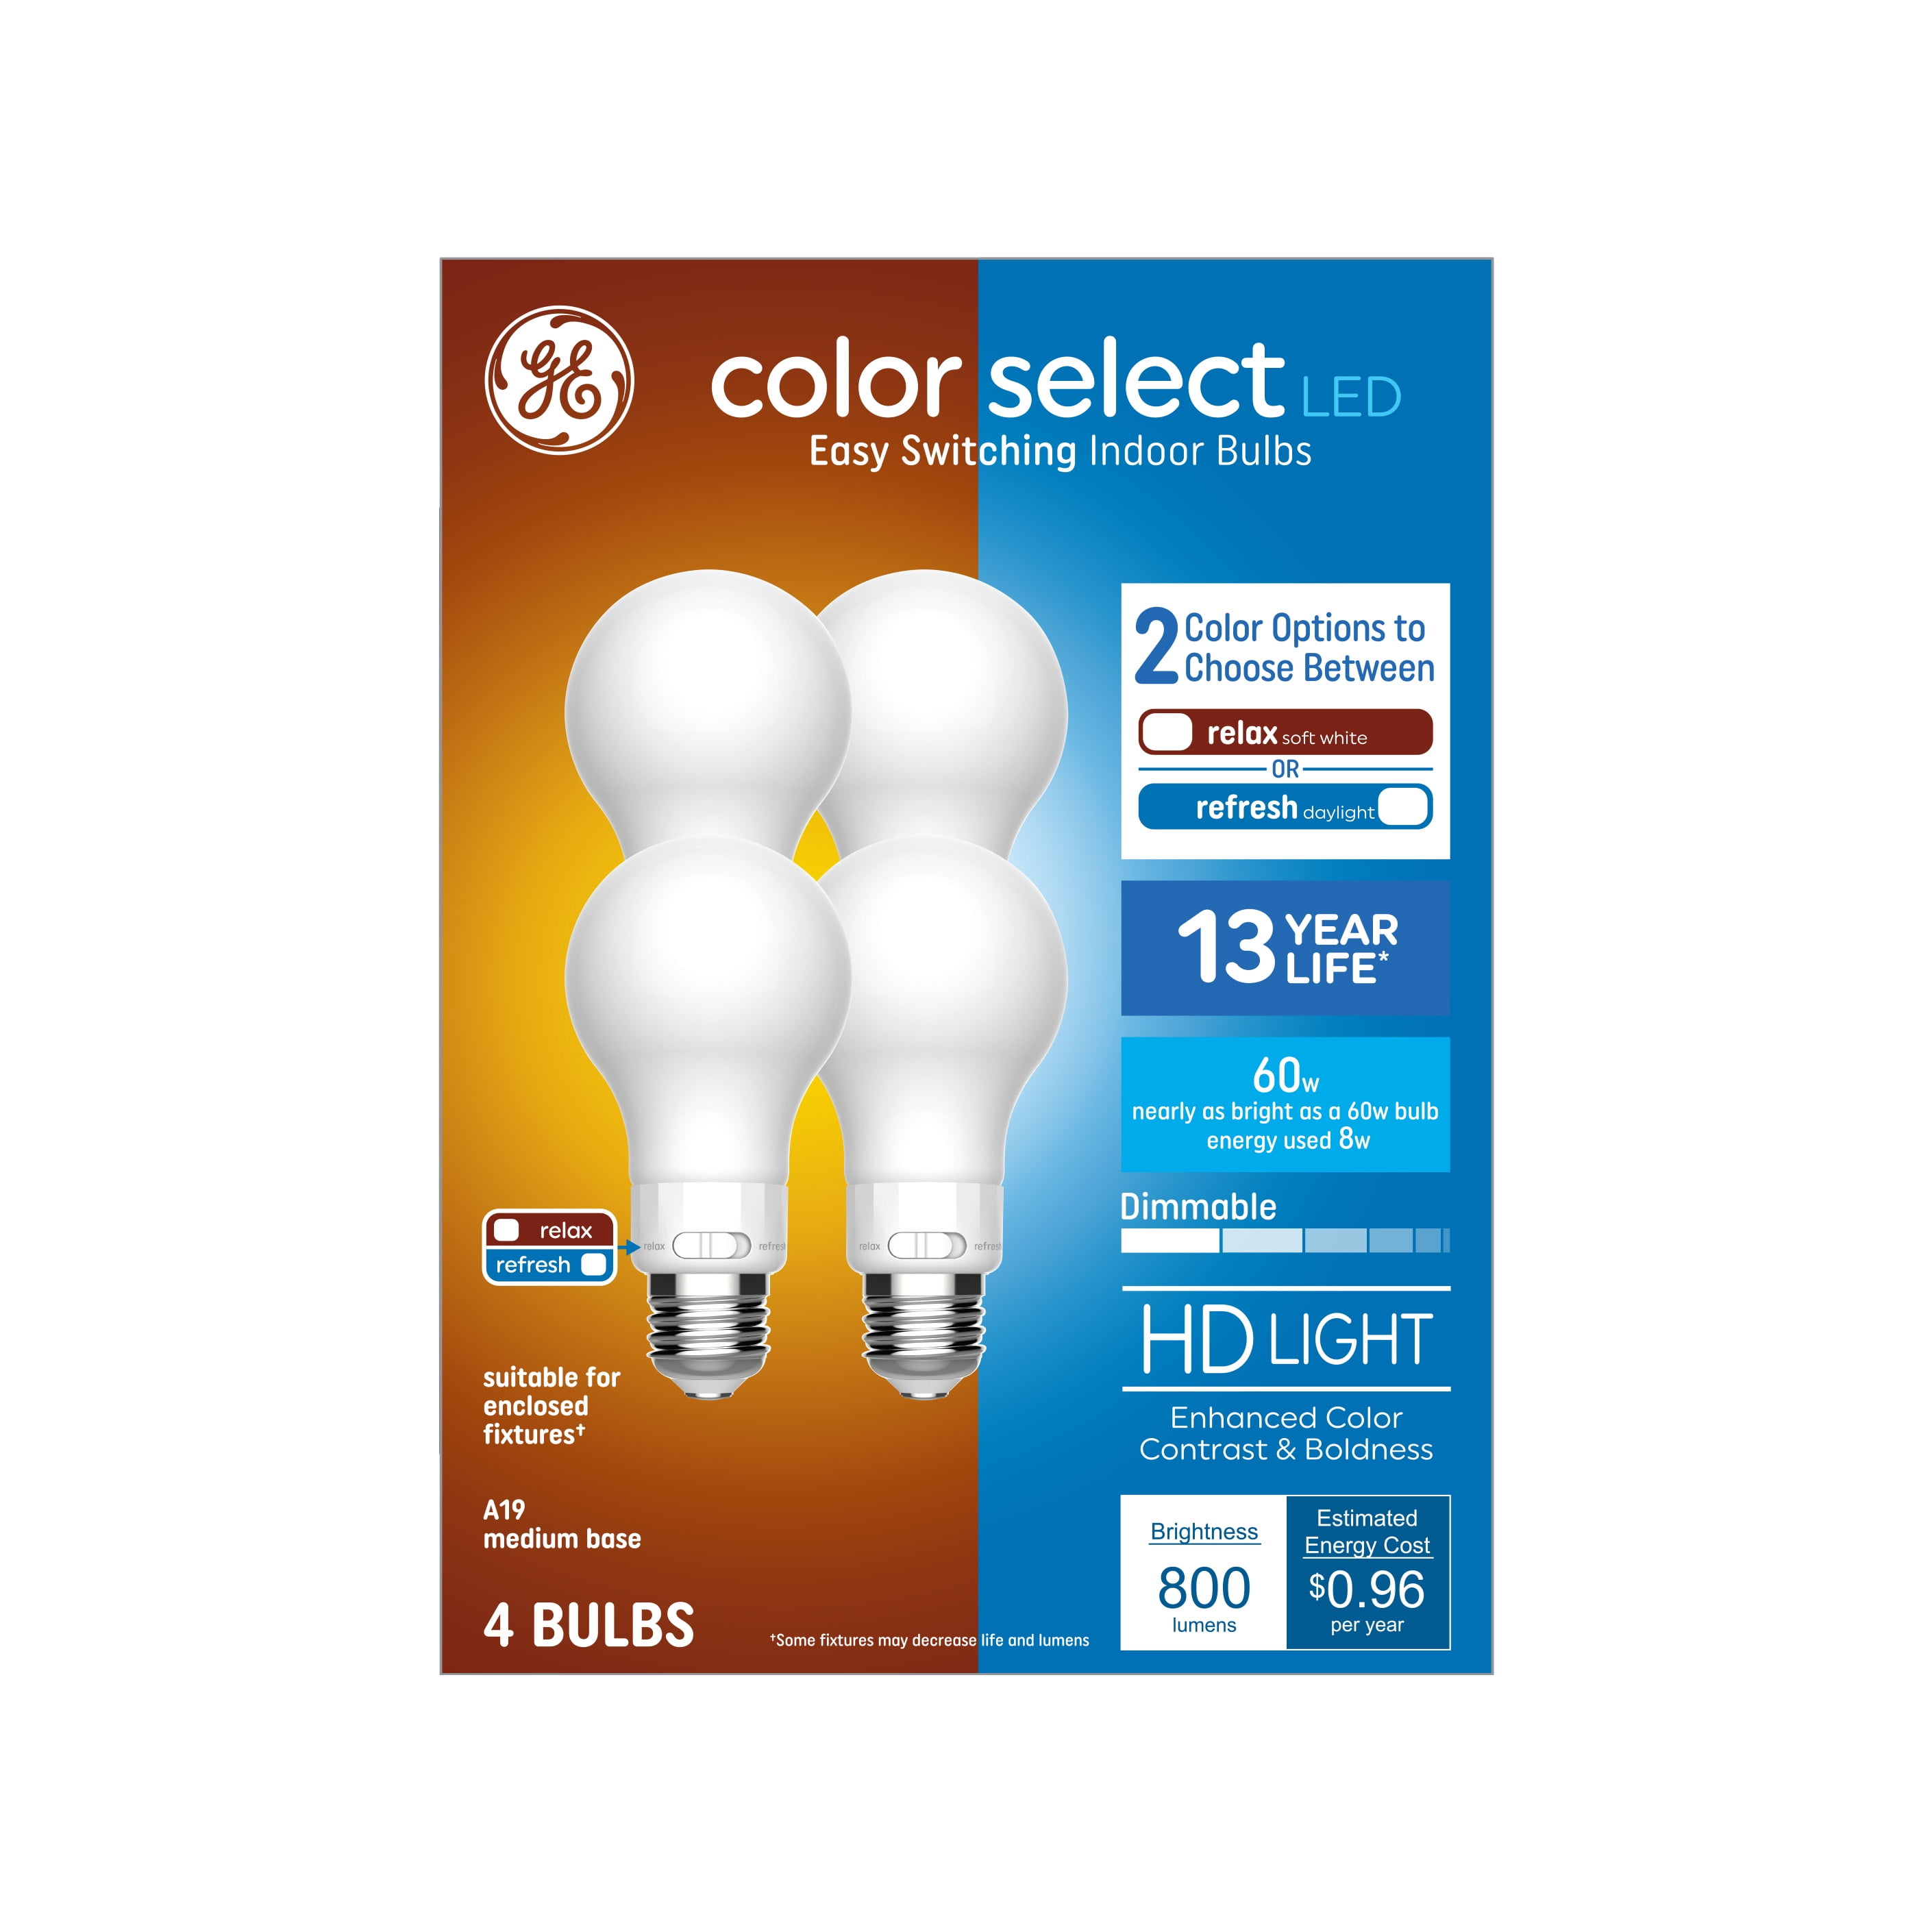 GE Color Select LED Light Bulbs, 60 Watt Eqv, Soft White or Daylight, A19 General Purpose, 13 year, 4pk